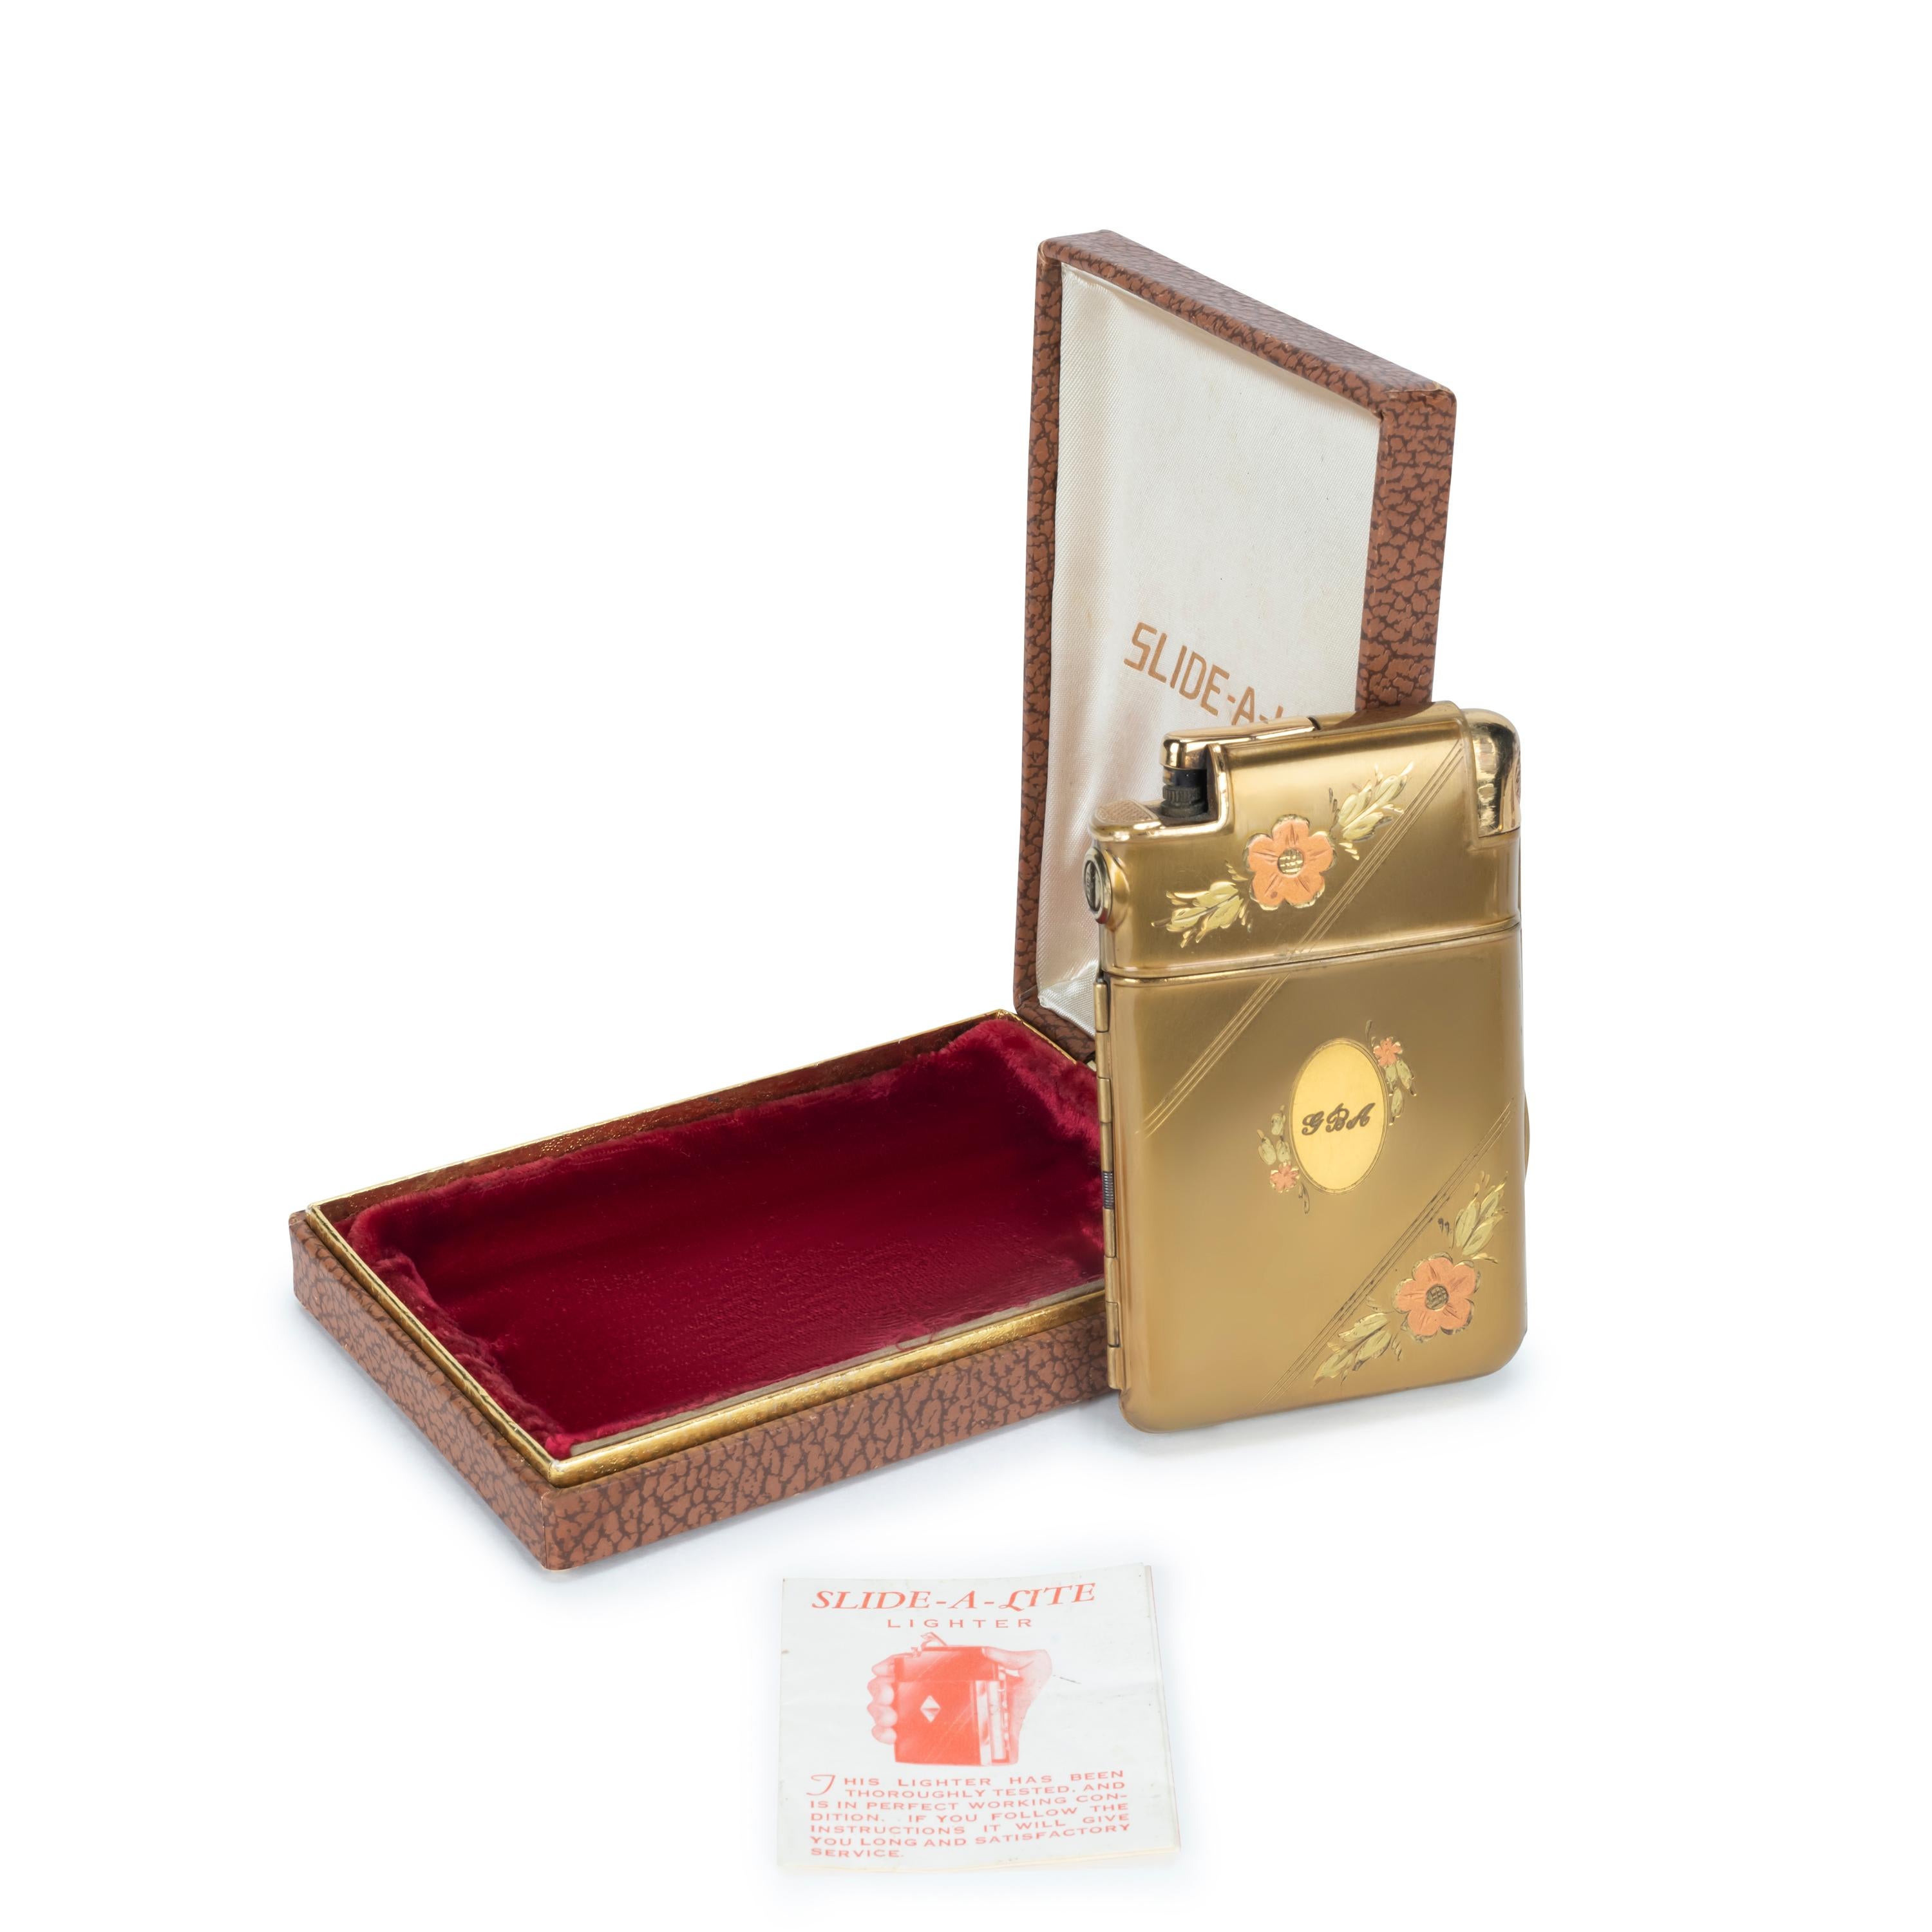 This is a stunning 1930's Art Deco Marathon gold and enamel cigarette case lighter in great working condition, and comes in the original pouch and box.
Red rich velvet interior with cream satin trimmings and chocolate lather on the outside. 
The